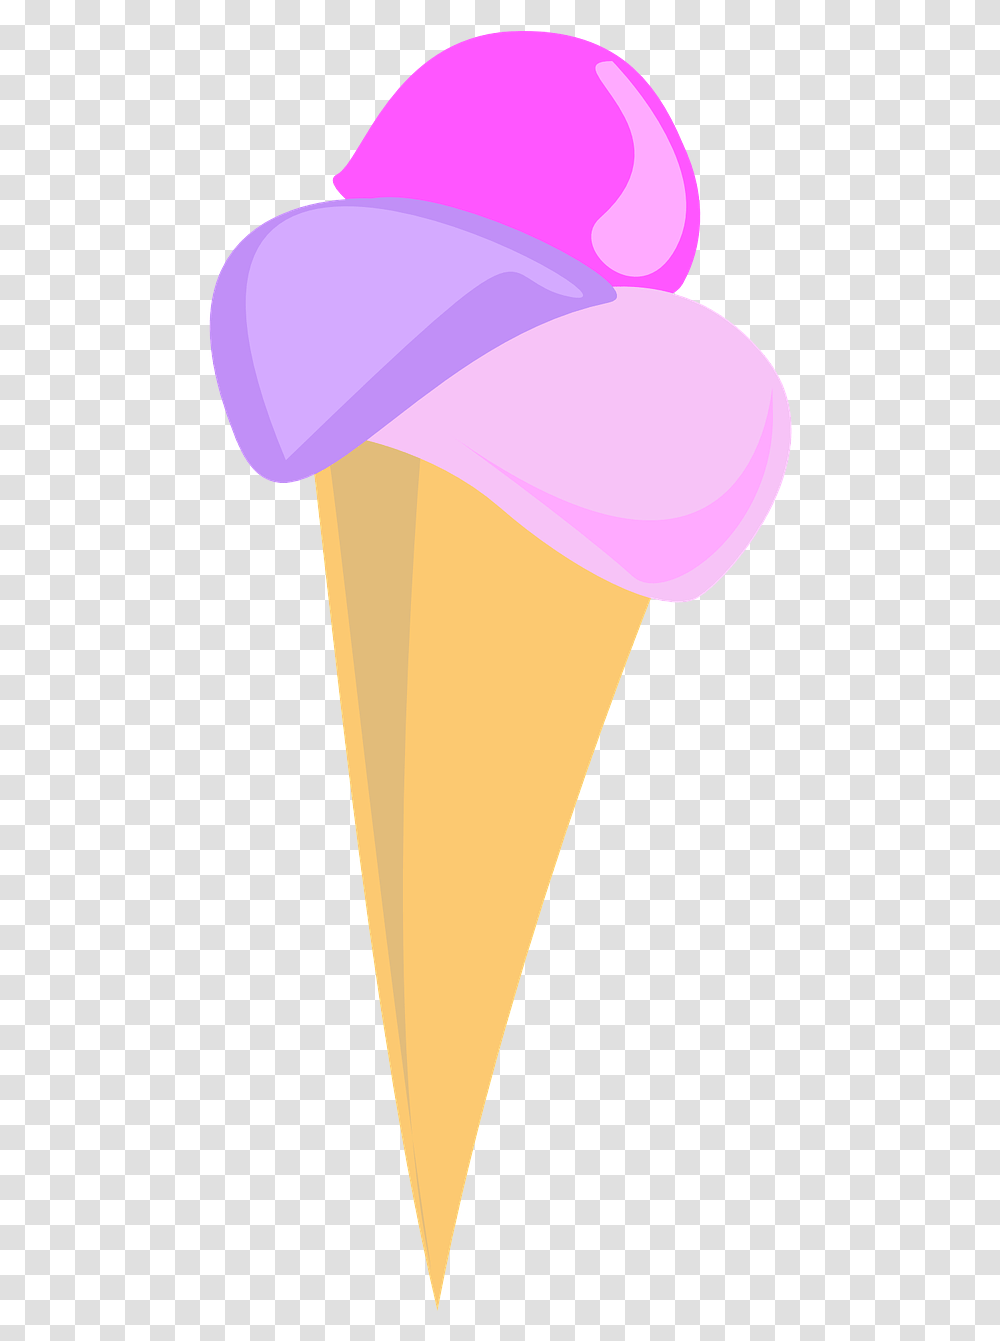 Ice Vector Graphicsfree Pictures Free Photos Free Ice Cream Cartoon, Cone, Dessert, Food, Creme Transparent Png